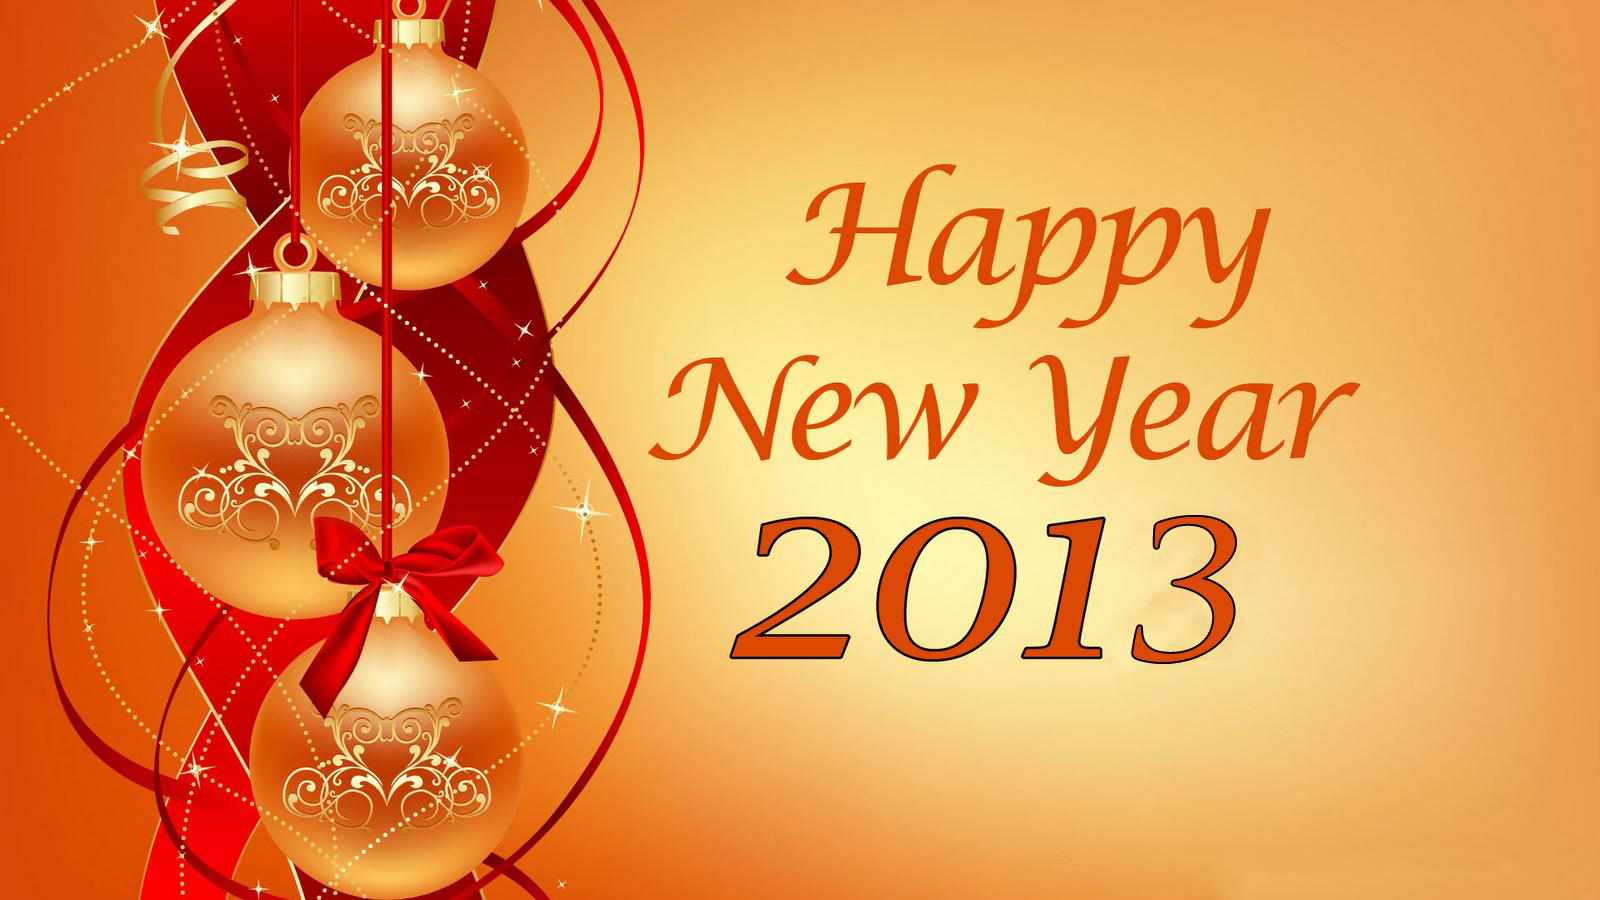 awesome new year wallpapers free